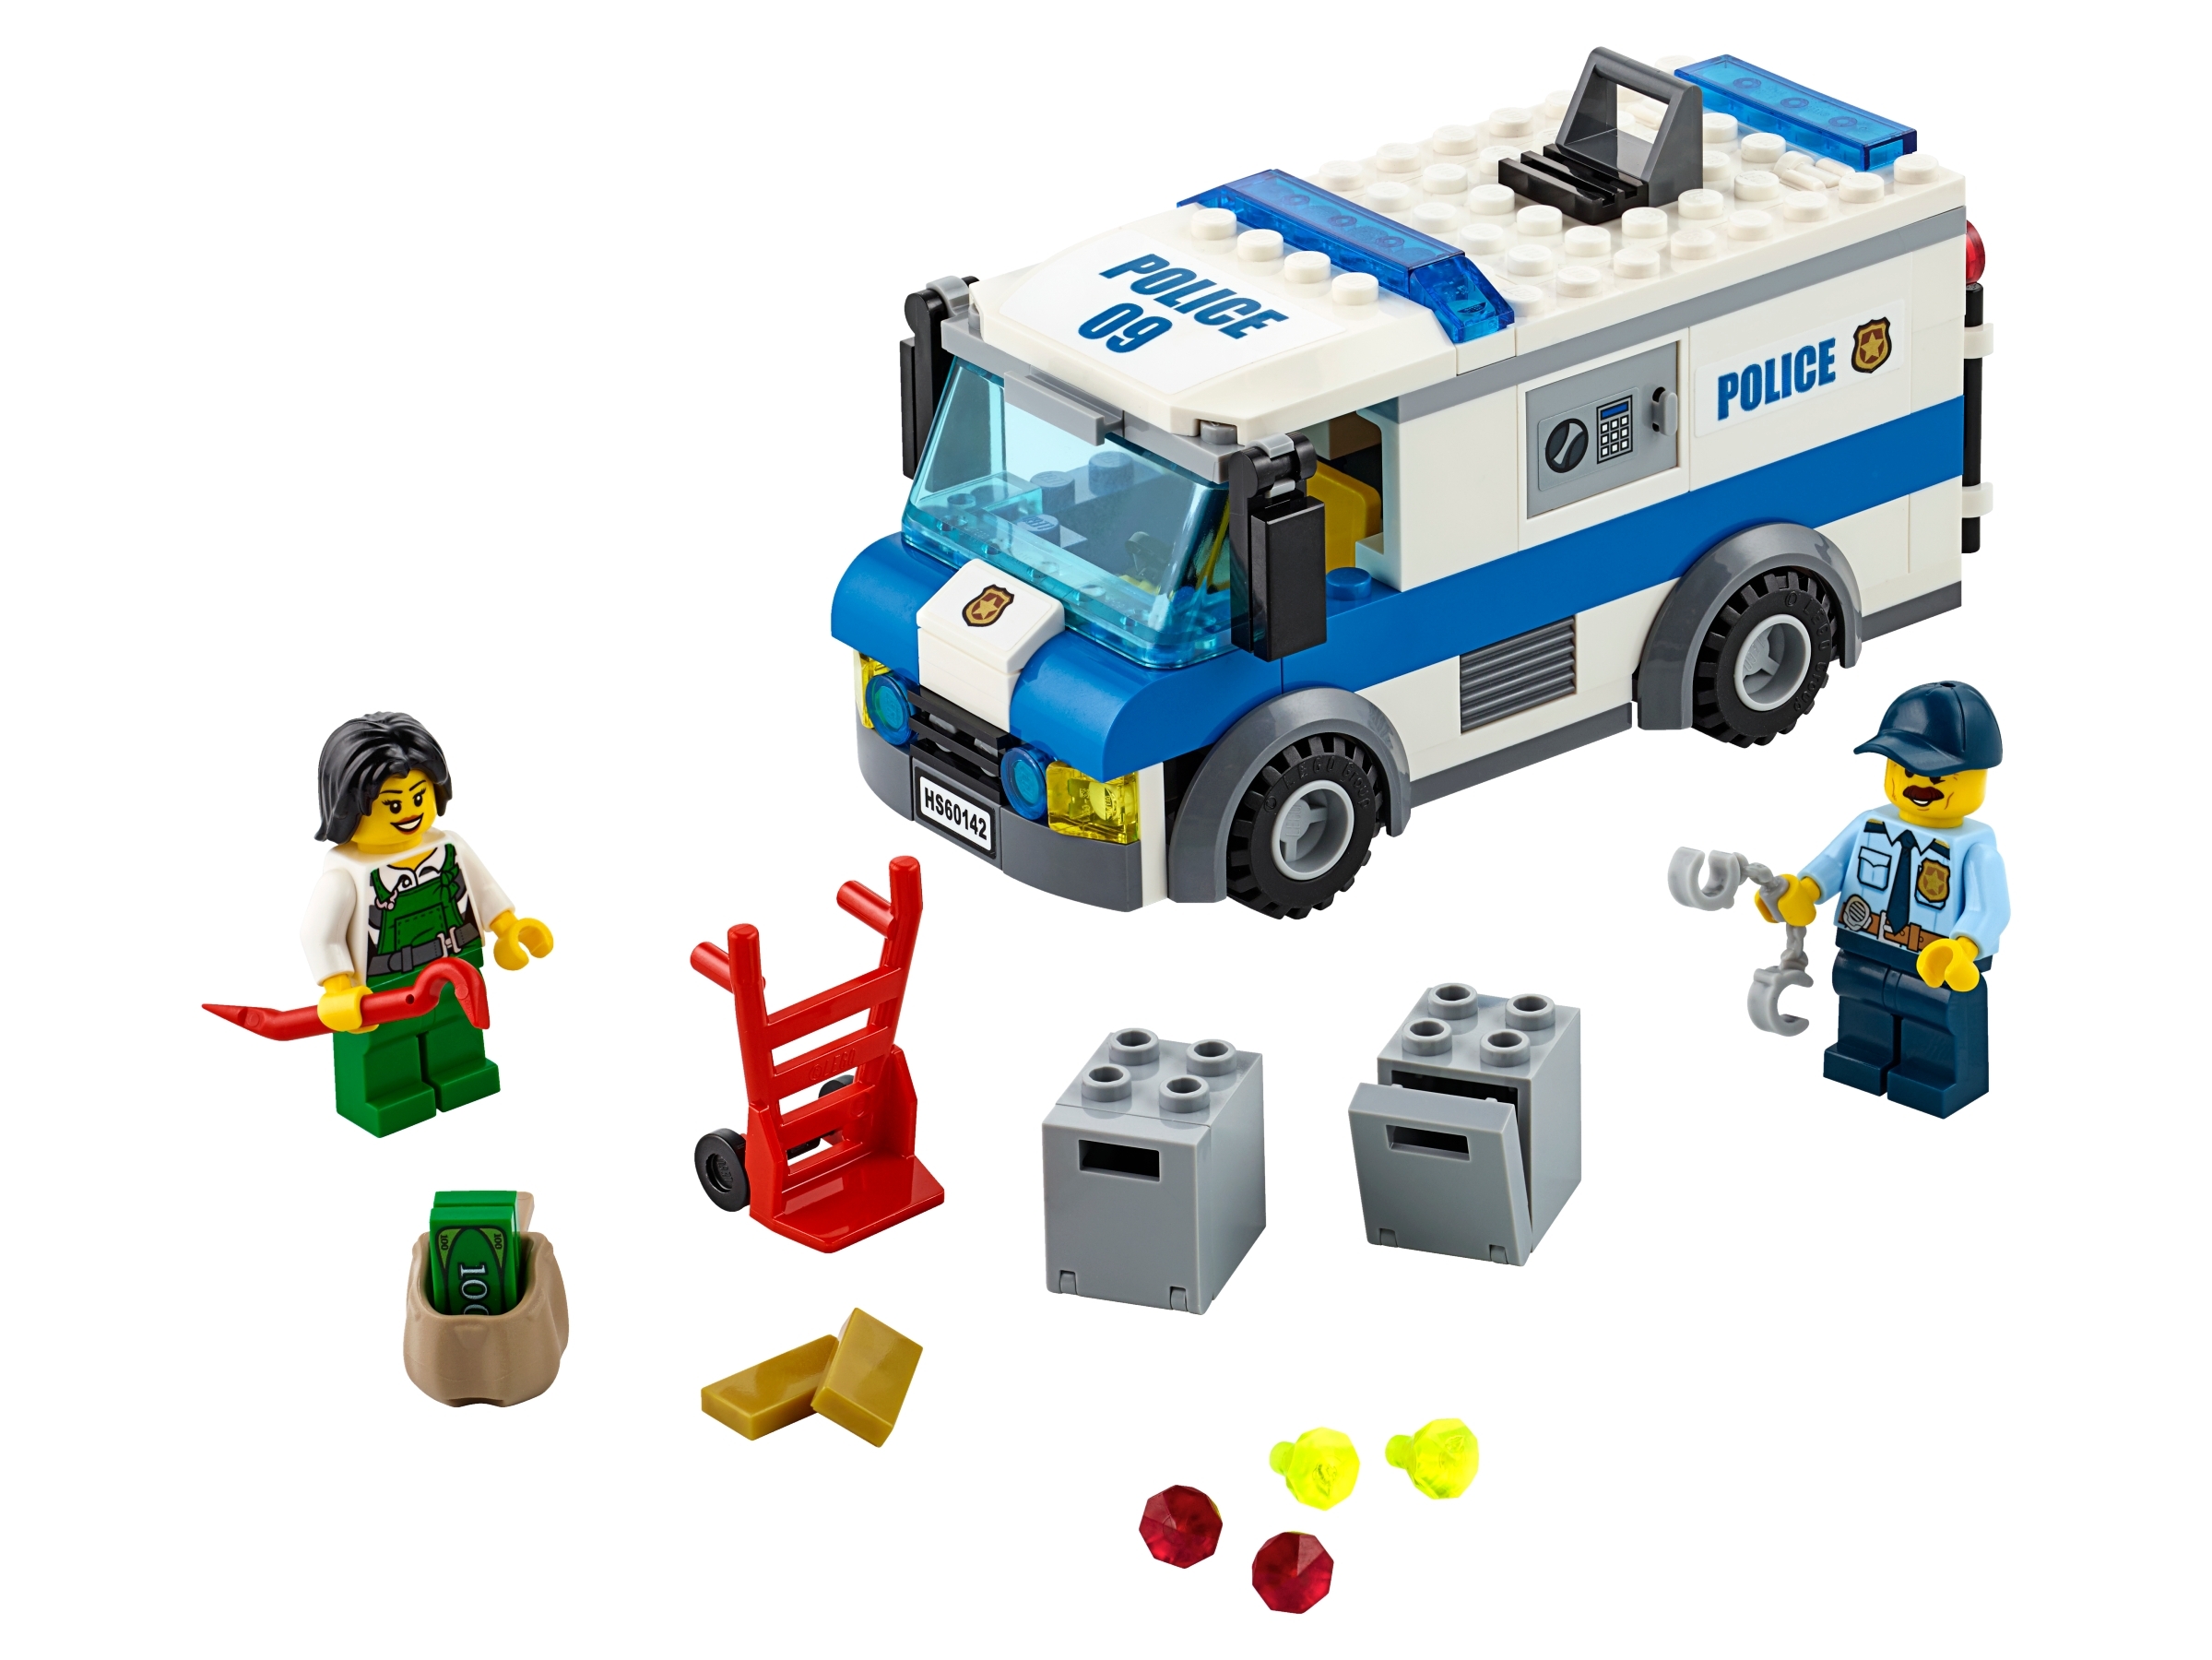 Money Transporter 60142 | City | Buy online at the Official LEGO® Shop US